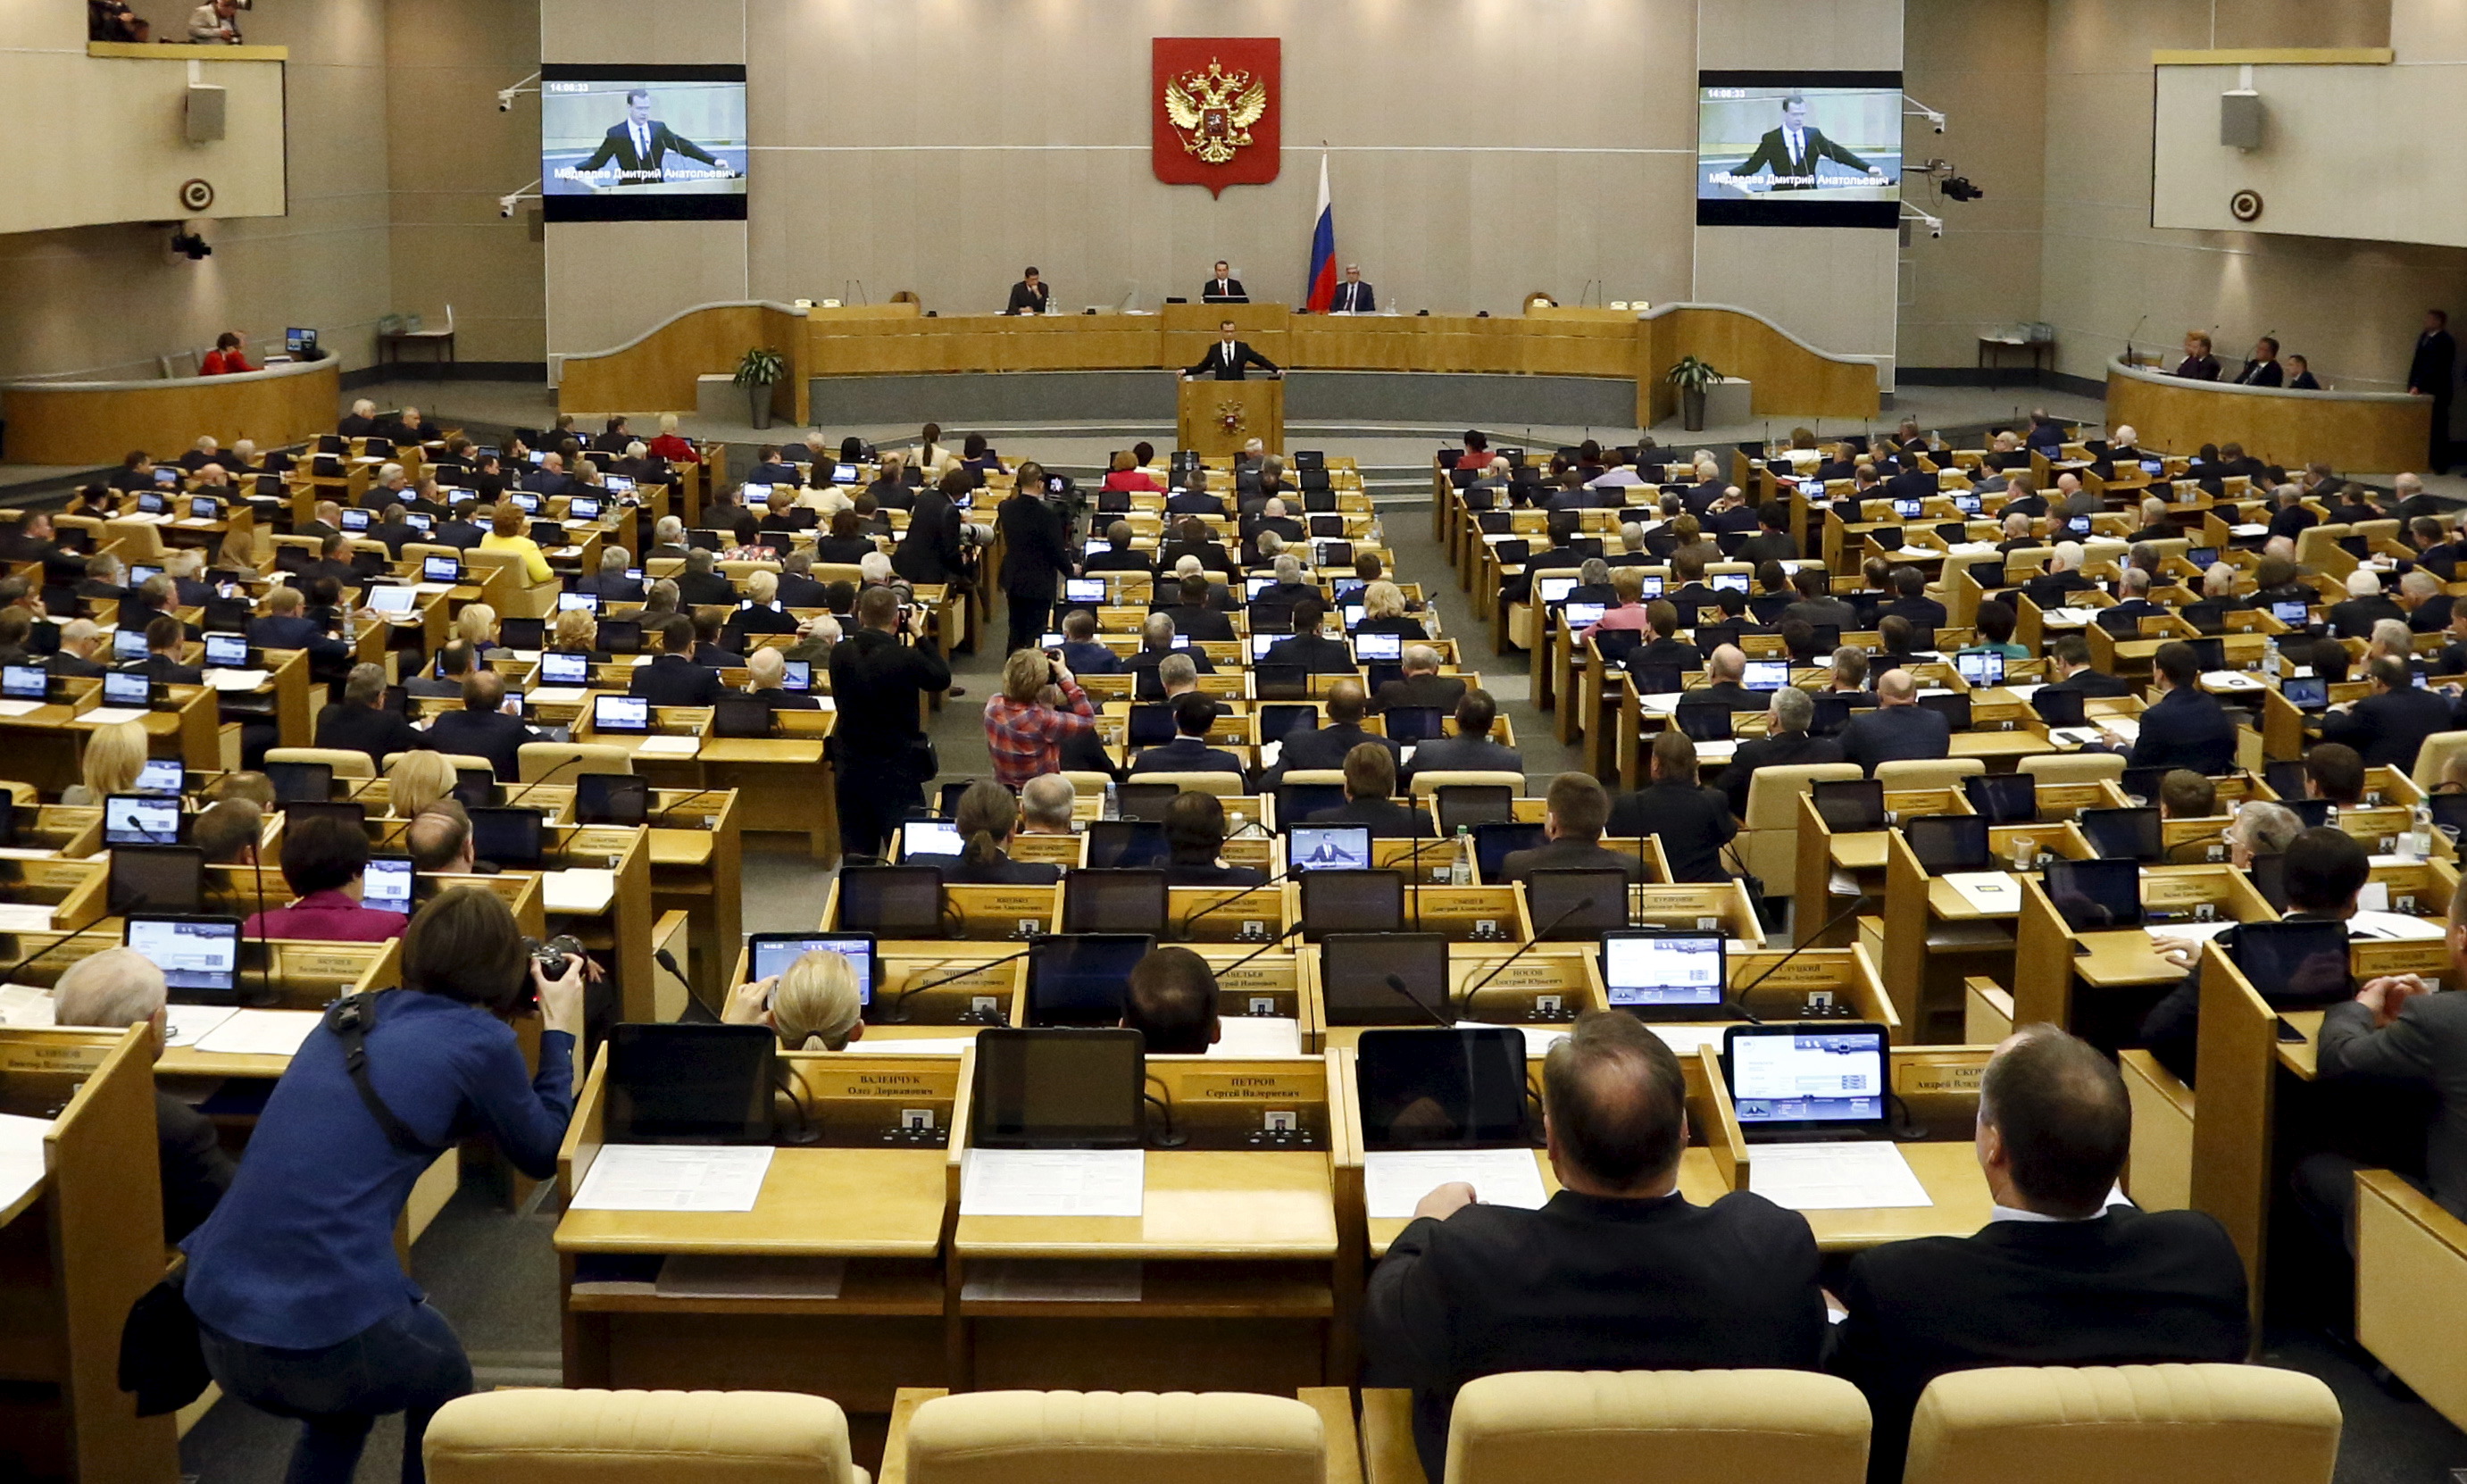 The state duma is elected by. Парламент Госдума. Парламент это государственная Дума. Парламент России 1999. Государственная Дума в современной России.